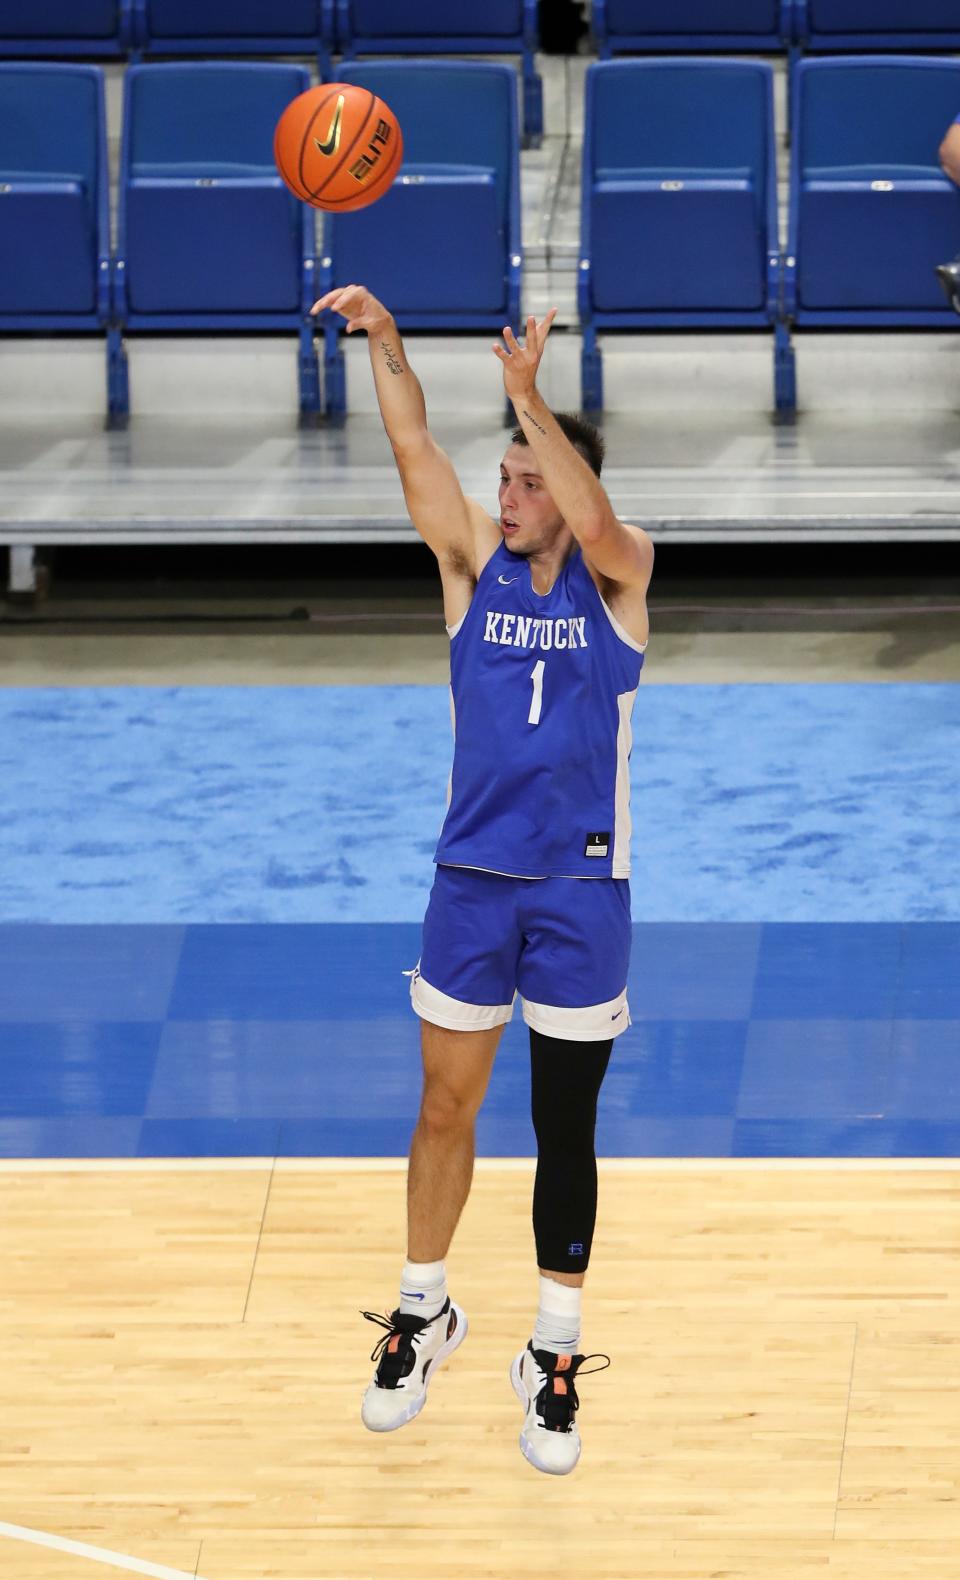 UK’s CJ Fredrick (1) shoots during a practice/scrimmage at Rupp Arena in Lexington, Ky. on Aug. 2, 2022 to raise relief funds for the victims of the floods in Eastern Kentucky.  